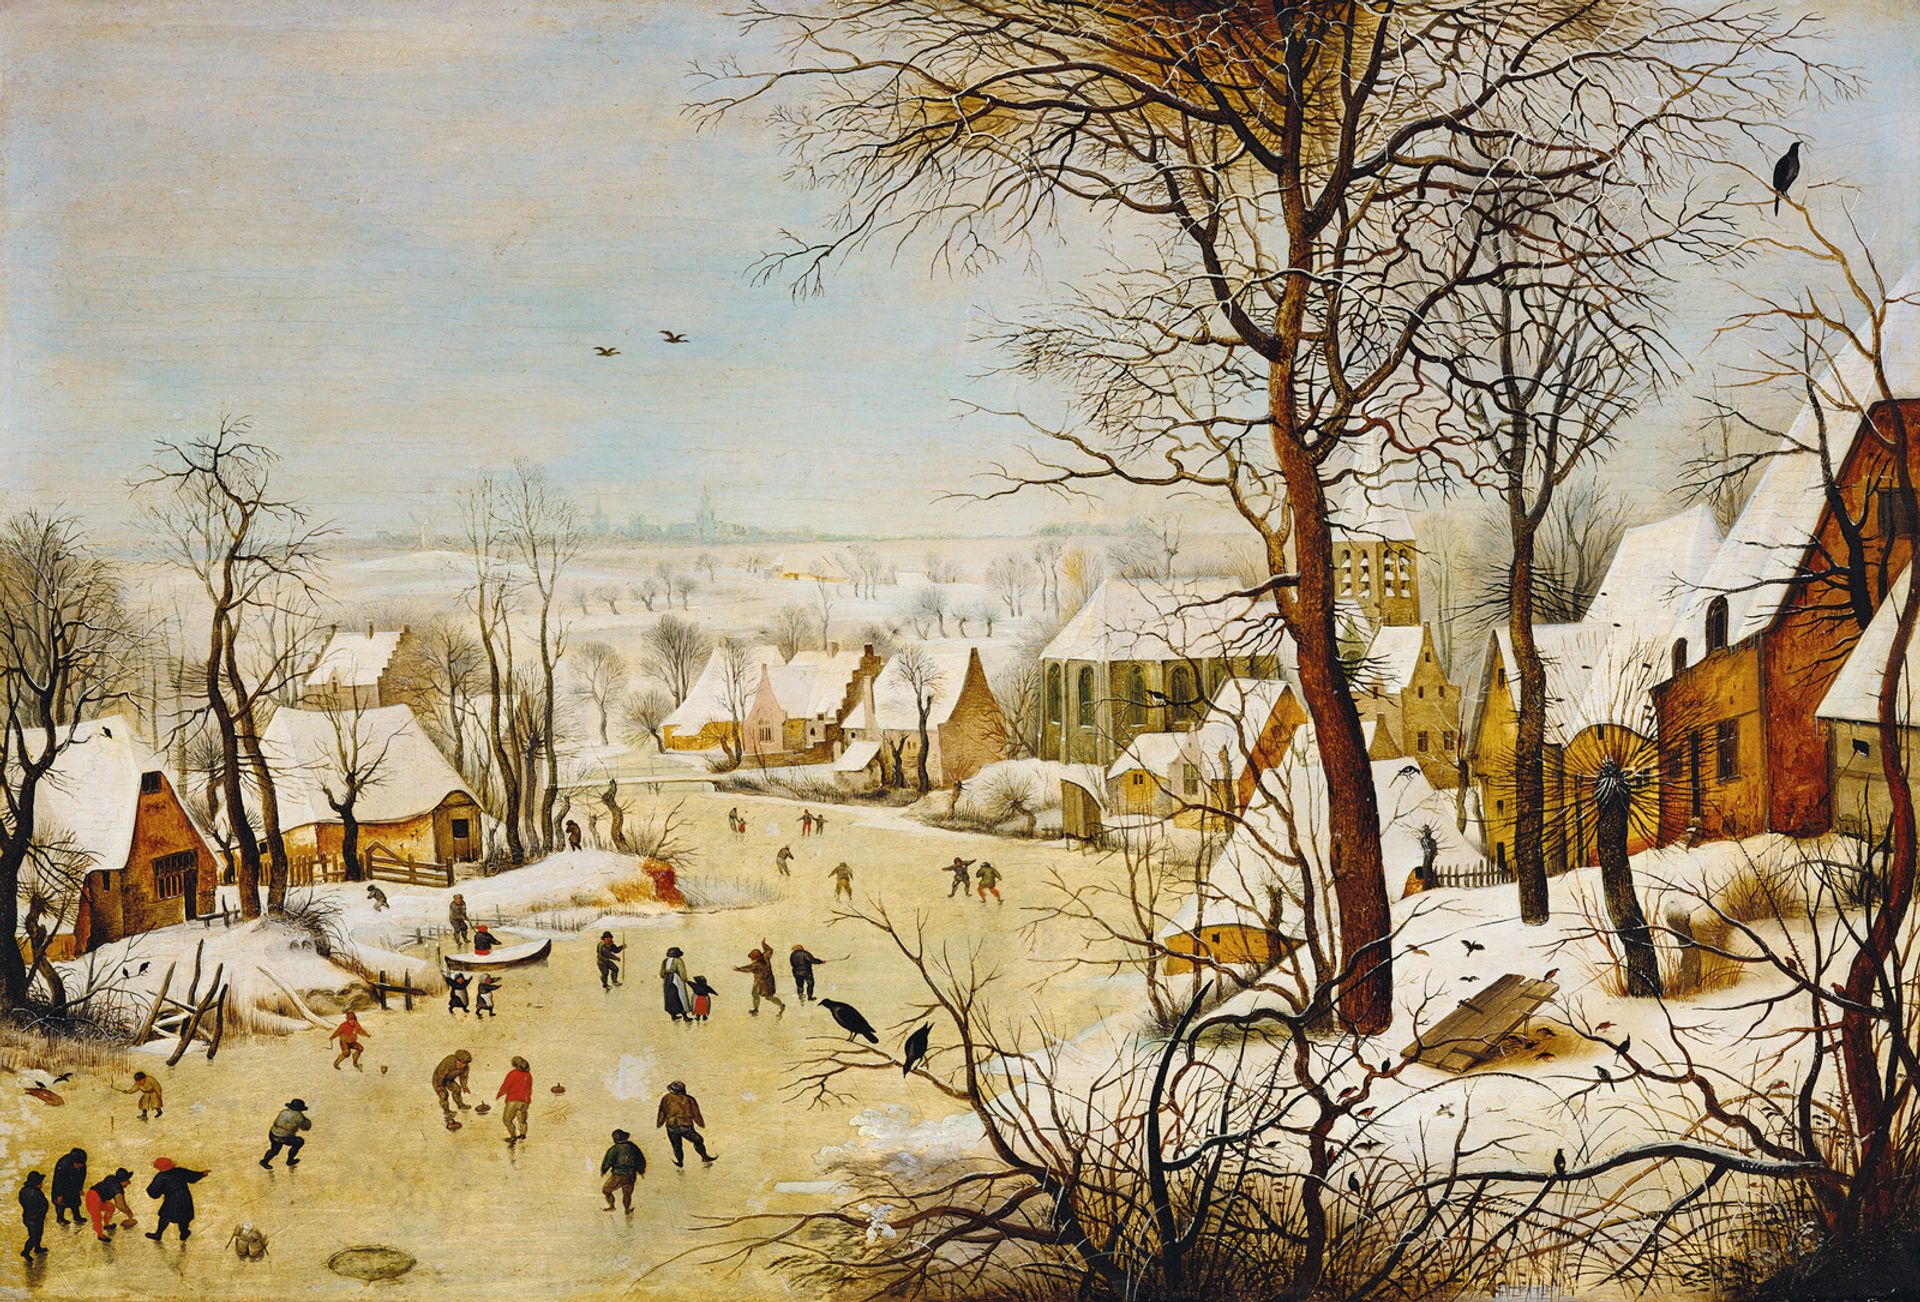 Pieter Bruegel the Elder’s Winter Landscape with Ice-skaters and Bird-trap (1565), frequently reproduced by the family workshop and others. Courtesy of the Royal Museums of the Fine Arts, Brussels.